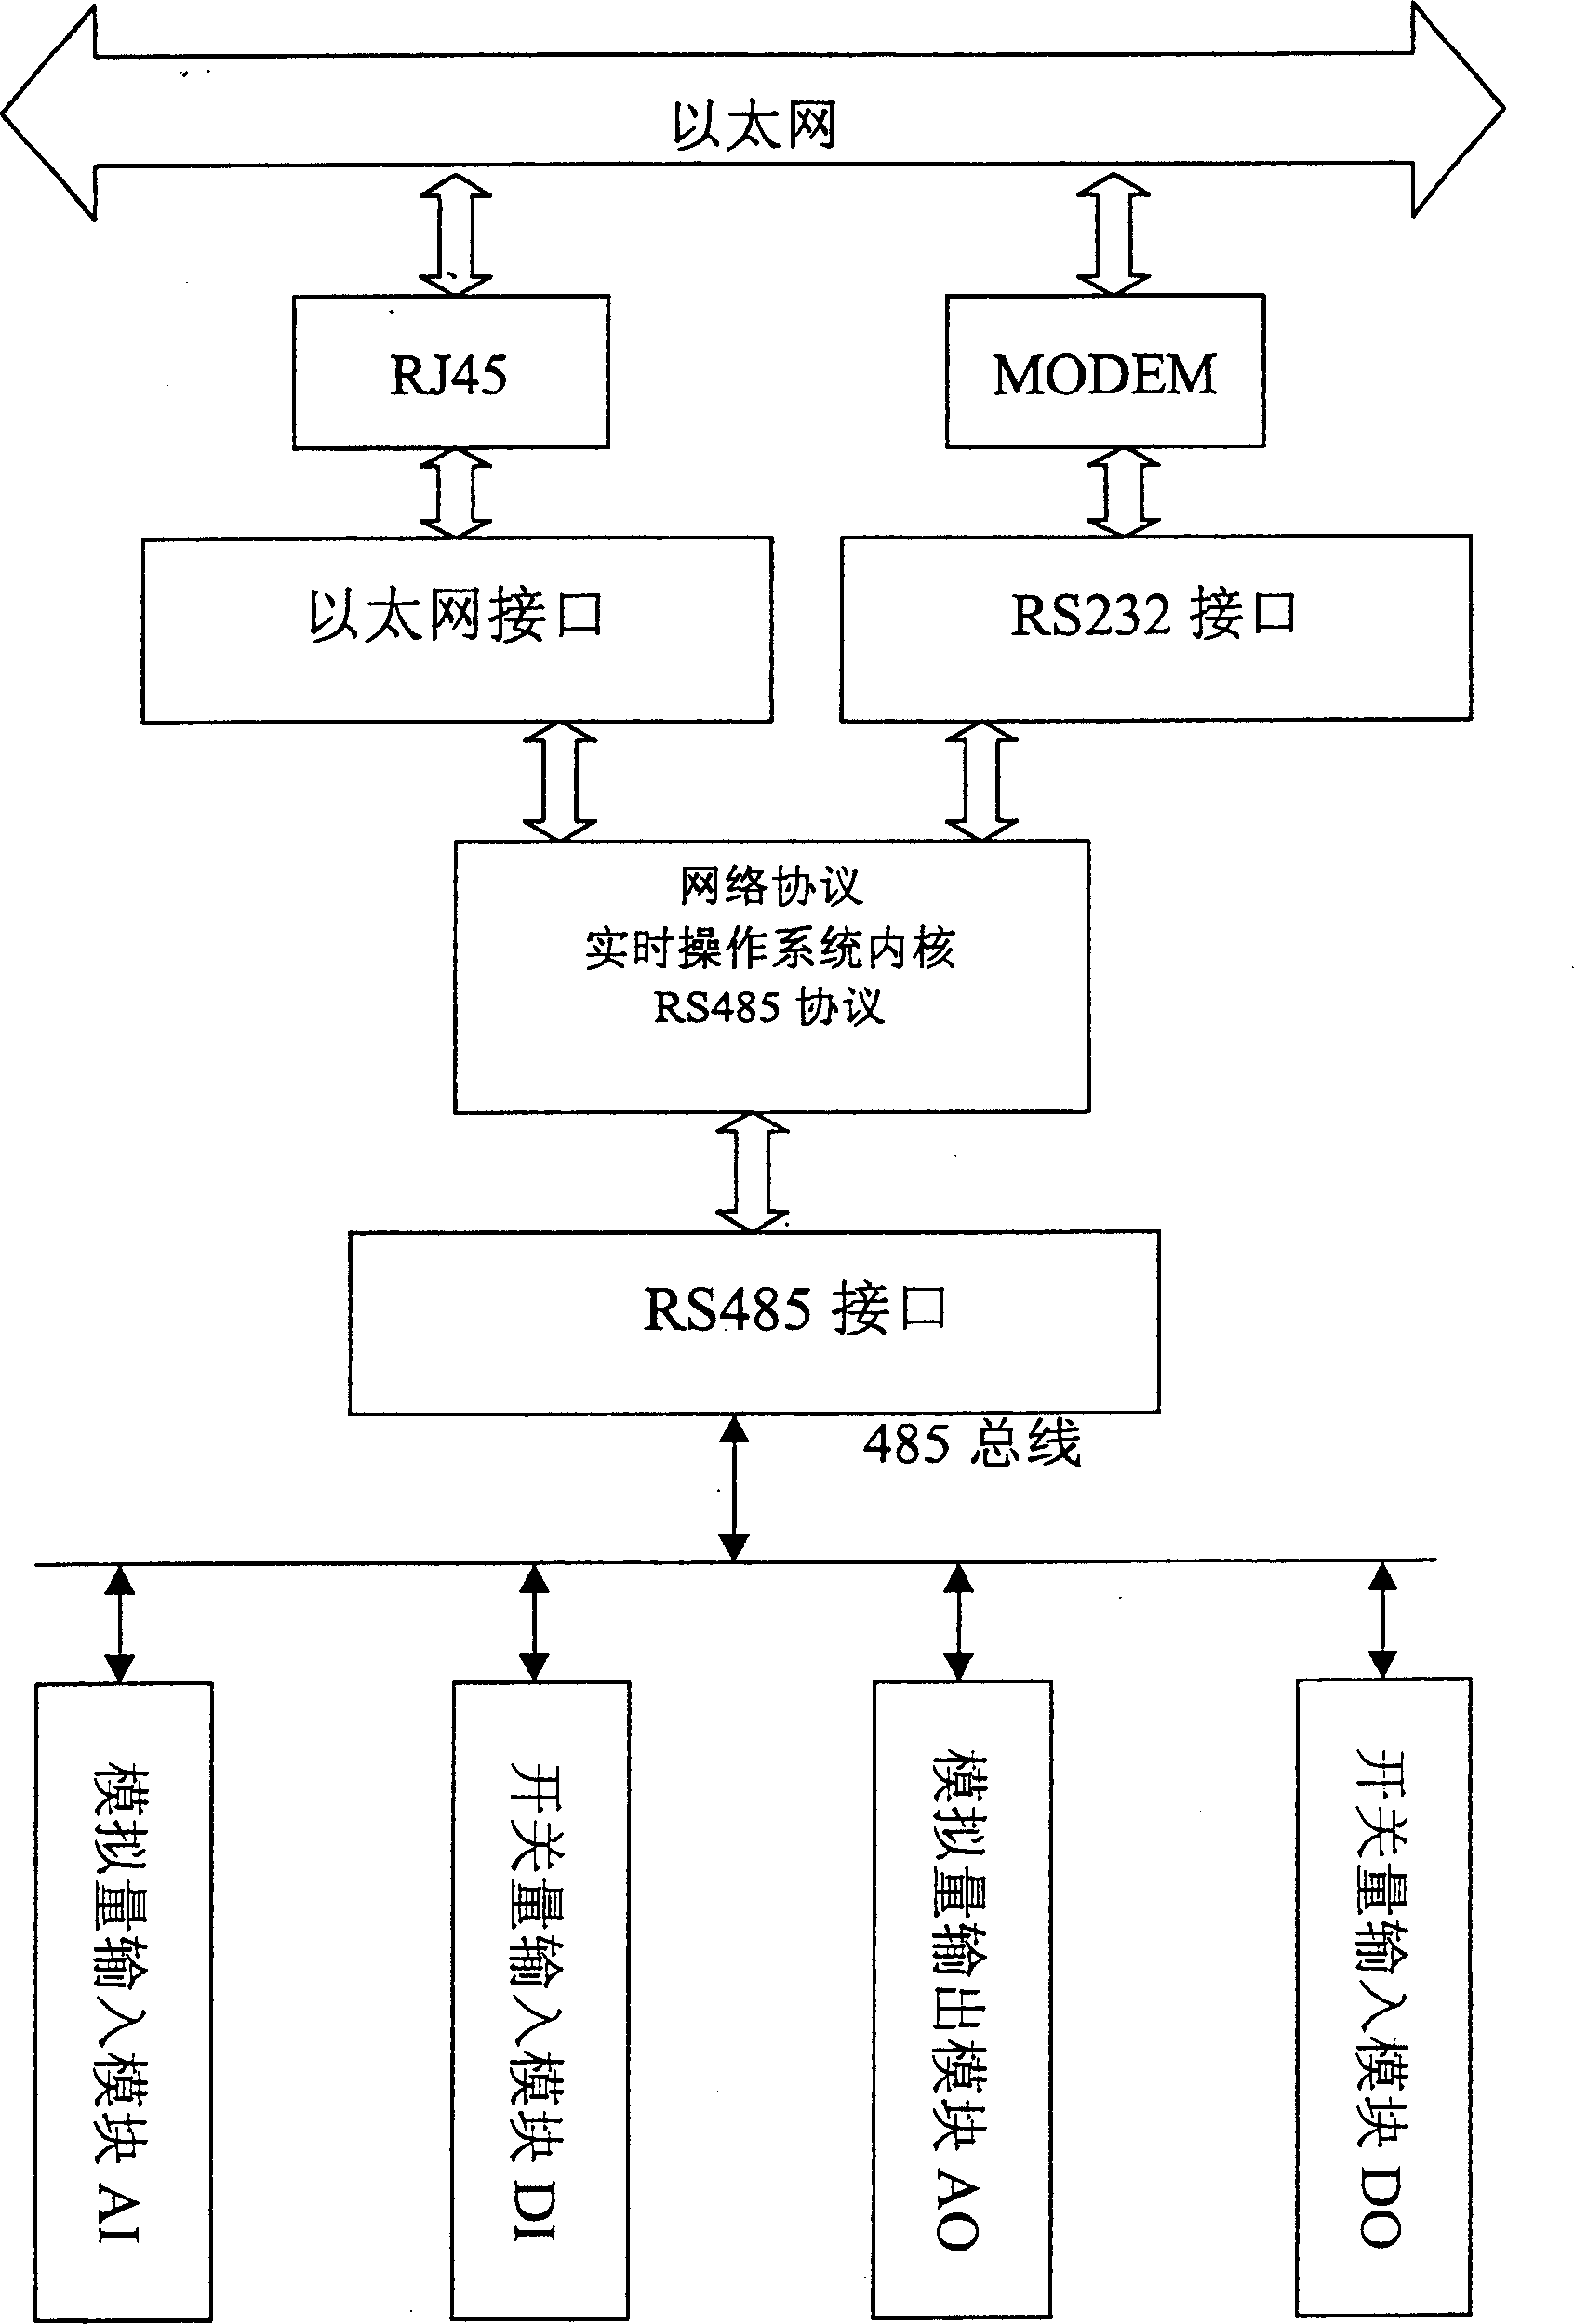 Embedded and networked remote input and output system